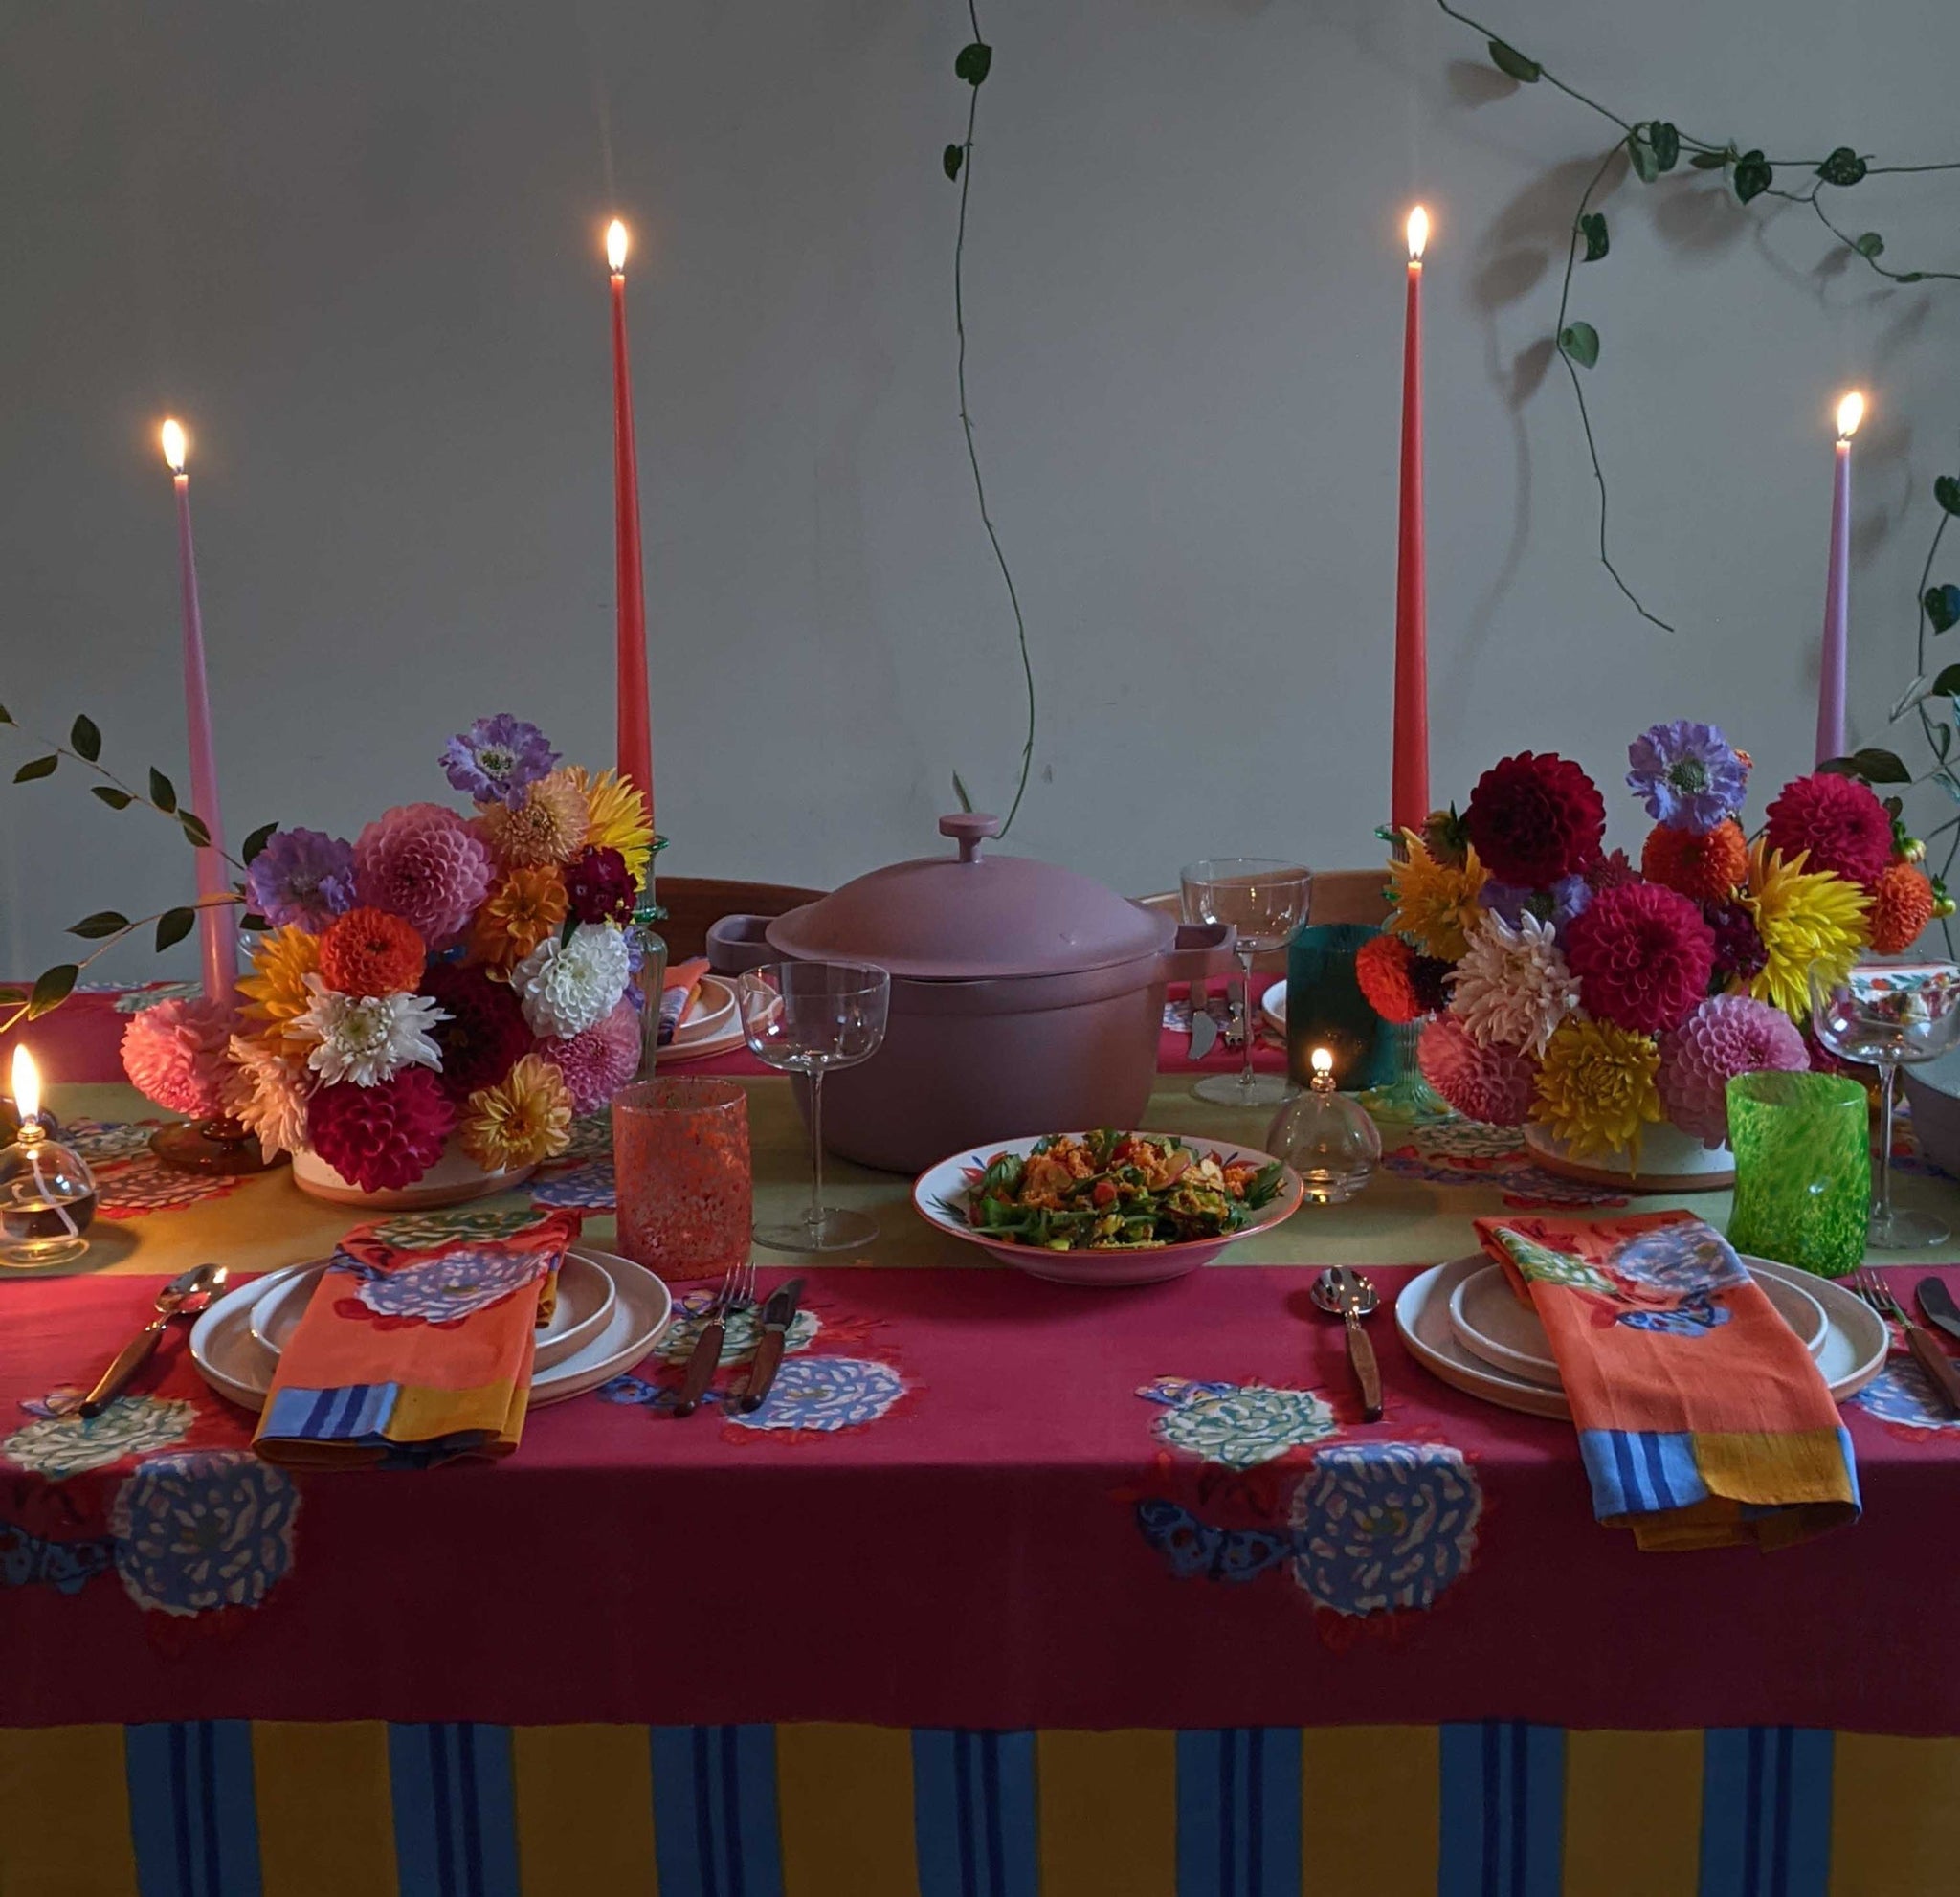 Dining table set with a pink floral tablecloth with a yellow and blue trim, white plates, orange napkins, colourful glasses, tapered candles, two bouquets of brightly coloured flowers, a lime-green table runner, and a pink ceramic pot in the centre 